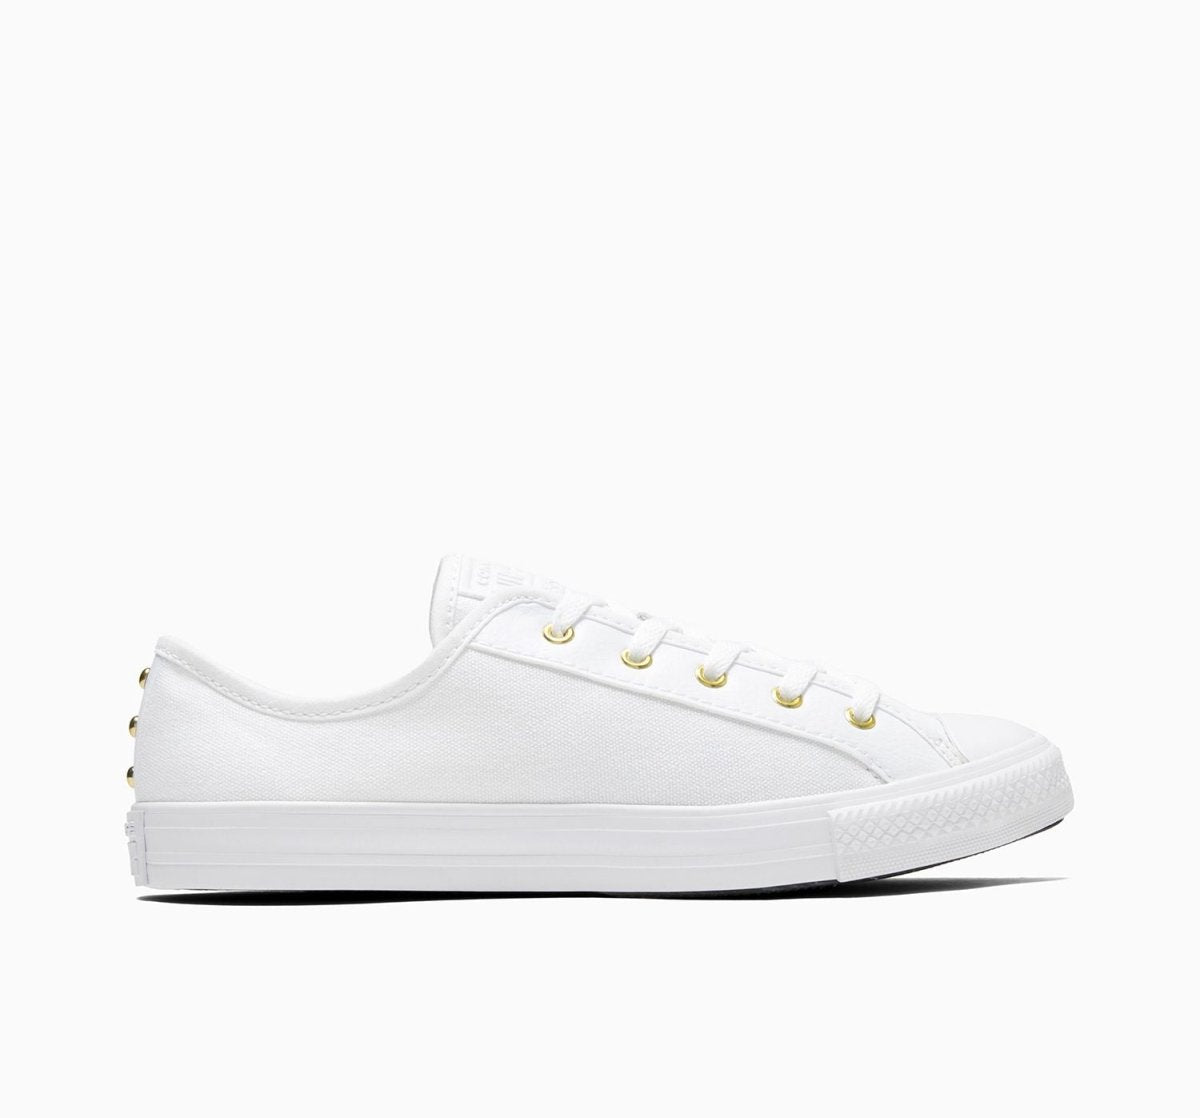 Converse CONVERSE WOMEN'S ALL STAR STAR STUD WHT/GLD SHOES - INSPORT